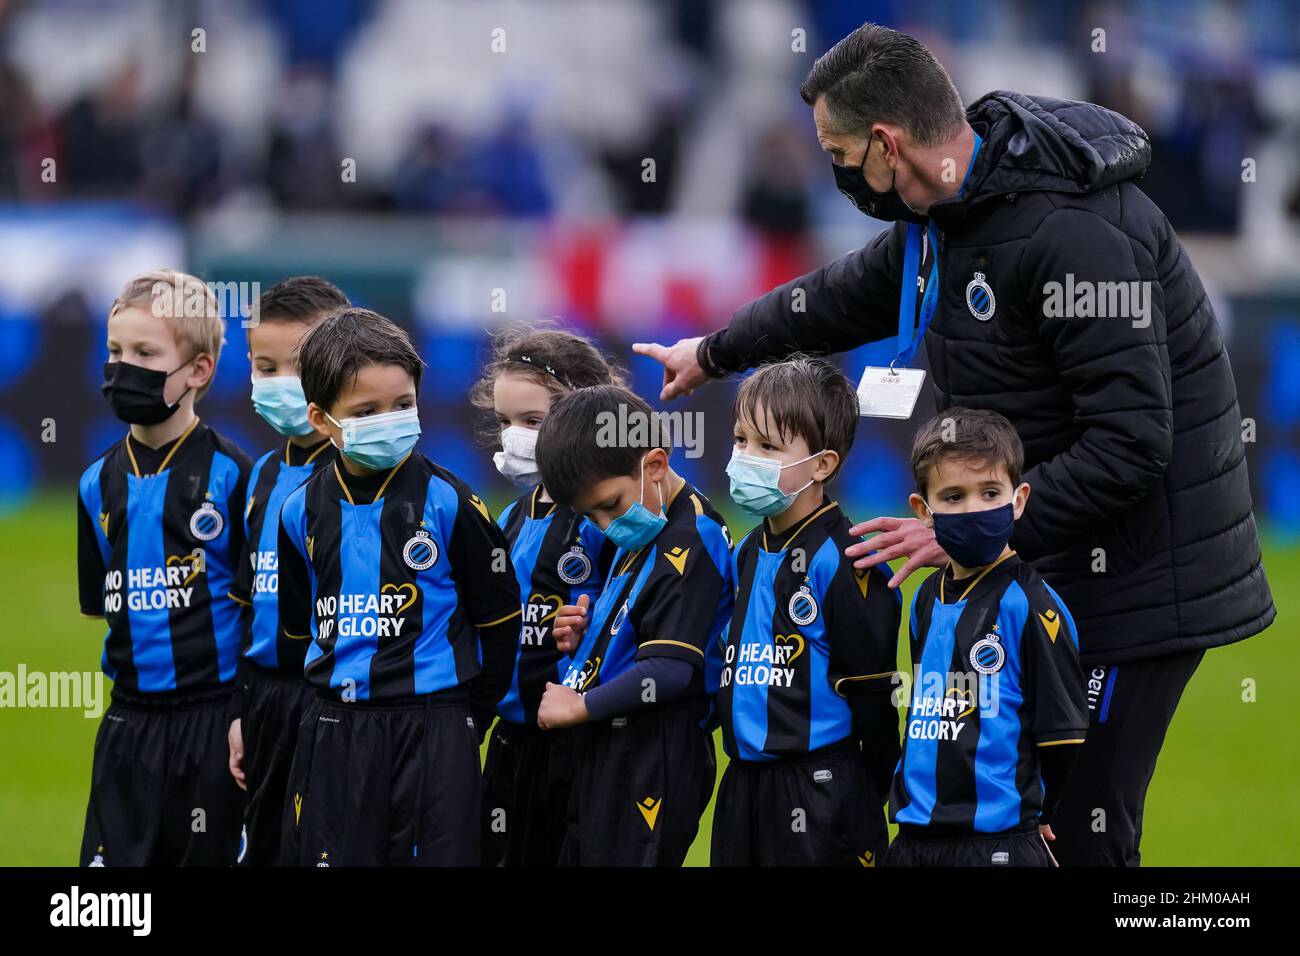 BRUGES, BELGIUM - FEBRUARY 6: Mascots of Club Brugge line up during the  Jupiler Pro League match between Club Brugge and KAA Gent at the Jan  Breydelstadion on February 6, 2022 in